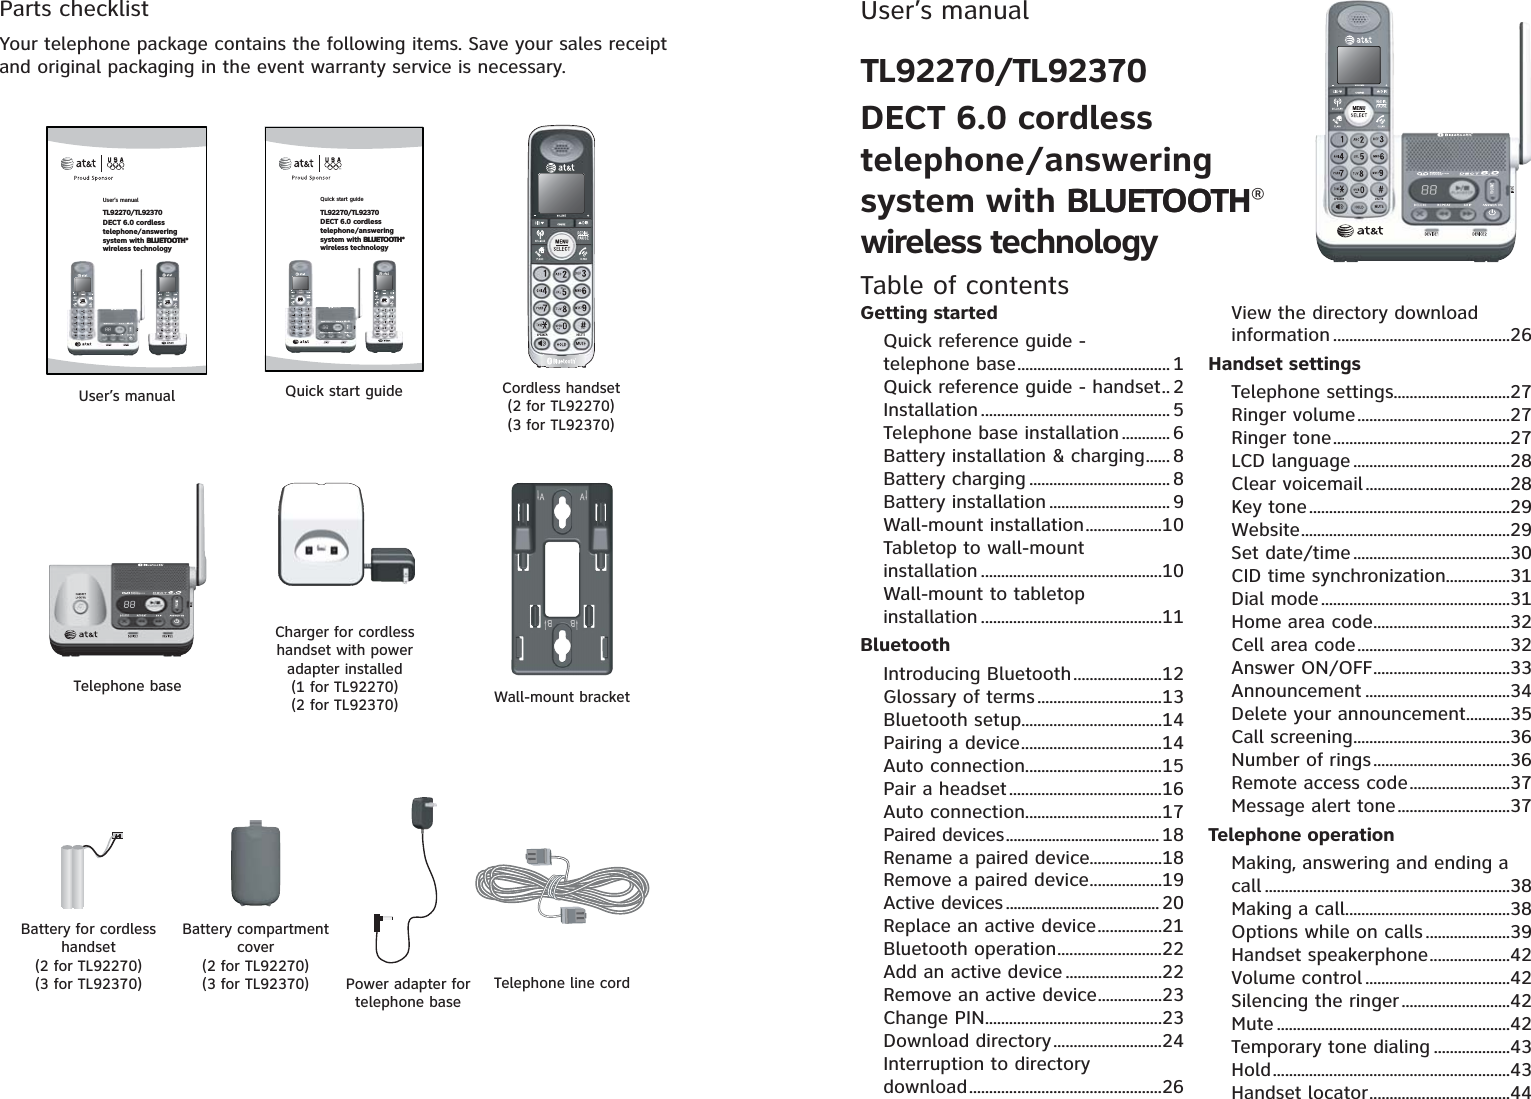 Parts checklistYour telephone package contains the following items. Save your sales receipt and original packaging in the event warranty service is necessary.Telephone line cordPower adapter for telephone baseCordless handset(2 for TL92270)(3 for TL92370)Telephone baseCharger for cordless handset with power adapter installed(1 for TL92270)(2 for TL92370) Wall-mount bracketBattery for cordless handset(2 for TL92270)(3 for TL92370)Battery compartment cover(2 for TL92270)(3 for TL92370)User’s manual Quick start guideUser’s manualTL92270/TL92370DECT 6.0 cordless telephone/answering system with BLUETOOTHBLUETOOTH®wireless technologyQuick start guideTL92270/TL92370DECT 6.0 cordless telephone/answering system with BLUETOOTHBLUETOOTH®wireless technologyUser’s manualTL92270/TL92370DECT 6.0 cordless telephone/answering system with BLUETOOTHBLUETOOTH®wireless technologyTable of contentsGetting startedQuick reference guide - telephone base...................................... 1Quick reference guide - handset.. 2Installation ............................................... 5Telephone base installation ............ 6Battery installation &amp; charging...... 8Battery charging ................................... 8Battery installation .............................. 9Wall-mount installation...................10Tabletop to wall-mount installation .............................................10Wall-mount to tabletop installation .............................................11BluetoothIntroducing Bluetooth......................12Glossary of terms...............................13Bluetooth setup...................................14Pairing a device...................................14Auto connection..................................15Pair a headset......................................16Auto connection..................................17Paired devices........................................ 18Rename a paired device..................18Remove a paired device..................19Active devices ........................................ 20Replace an active device................21Bluetooth operation..........................22Add an active device ........................22Remove an active device................23Change PIN............................................23Download directory...........................24Interruption to directory download................................................26View the directory download information ............................................26Handset settingsTelephone settings.............................27Ringer volume......................................27Ringer tone............................................27LCD language .......................................28Clear voicemail....................................28Key tone..................................................29Website....................................................29Set date/time.......................................30CID time synchronization................31Dial mode...............................................31Home area code..................................32Cell area code......................................32Answer ON/OFF..................................33Announcement ....................................34Delete your announcement...........35Call screening.......................................36Number of rings..................................36Remote access code.........................37Message alert tone............................37Telephone operationMaking, answering and ending a call .............................................................38Making a call.........................................38Options while on calls .....................39Handset speakerphone....................42Volume control ....................................42Silencing the ringer...........................42Mute ..........................................................42Temporary tone dialing ...................43Hold...........................................................43Handset locator...................................44